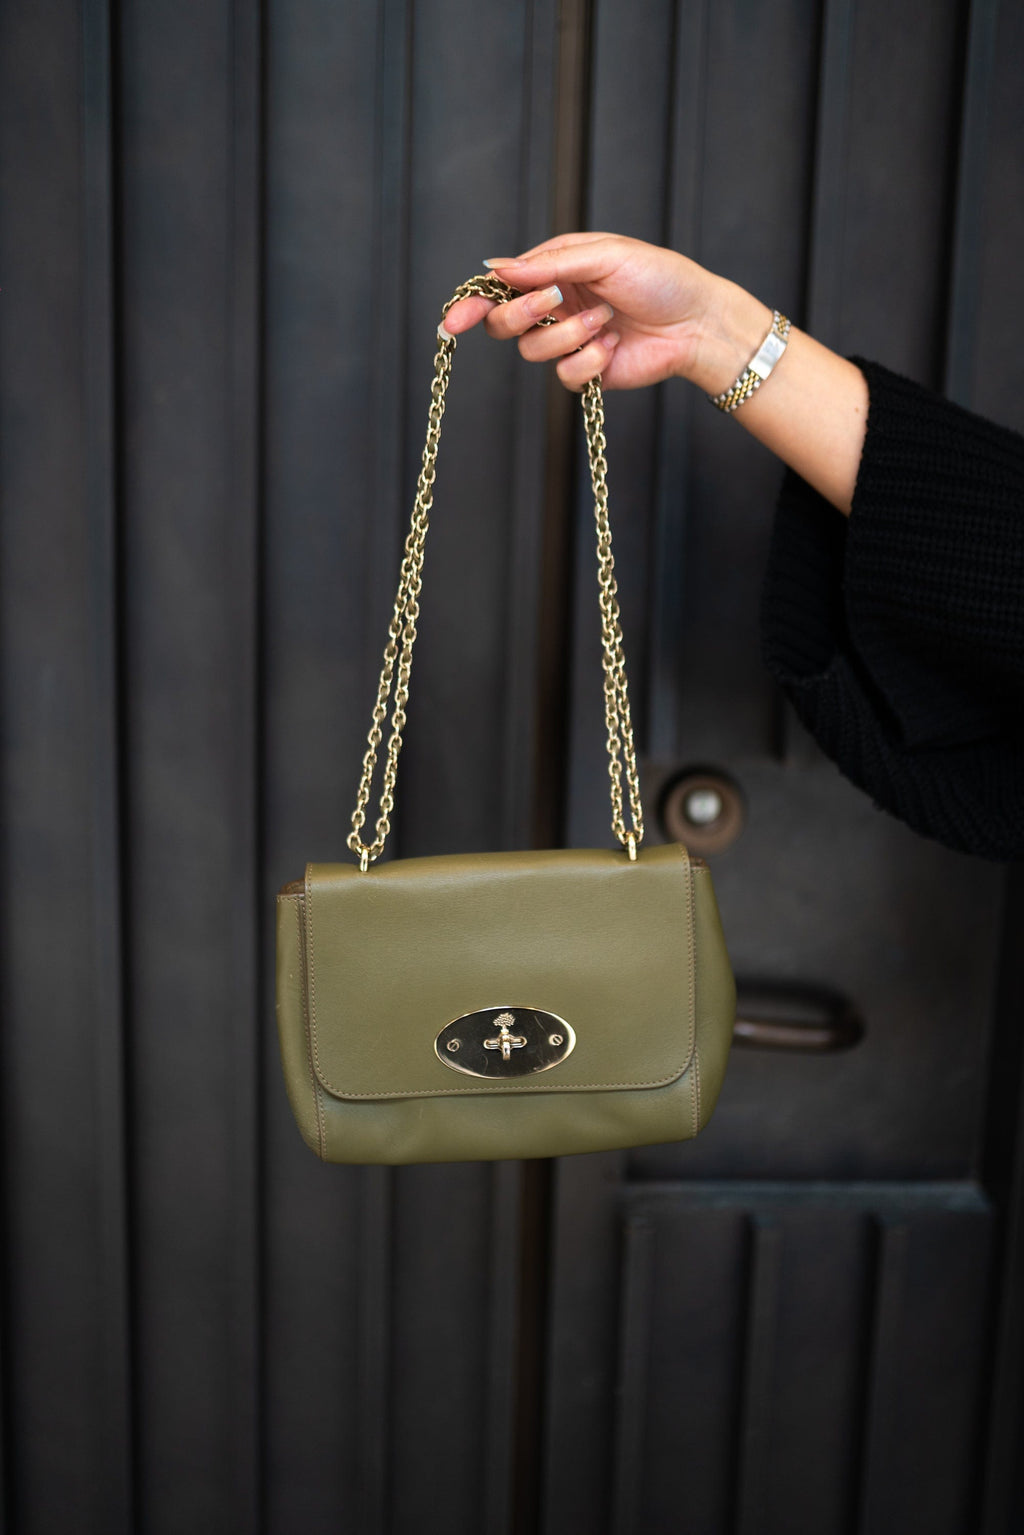 How To Authenticate A Mulberry Handbag - Material World